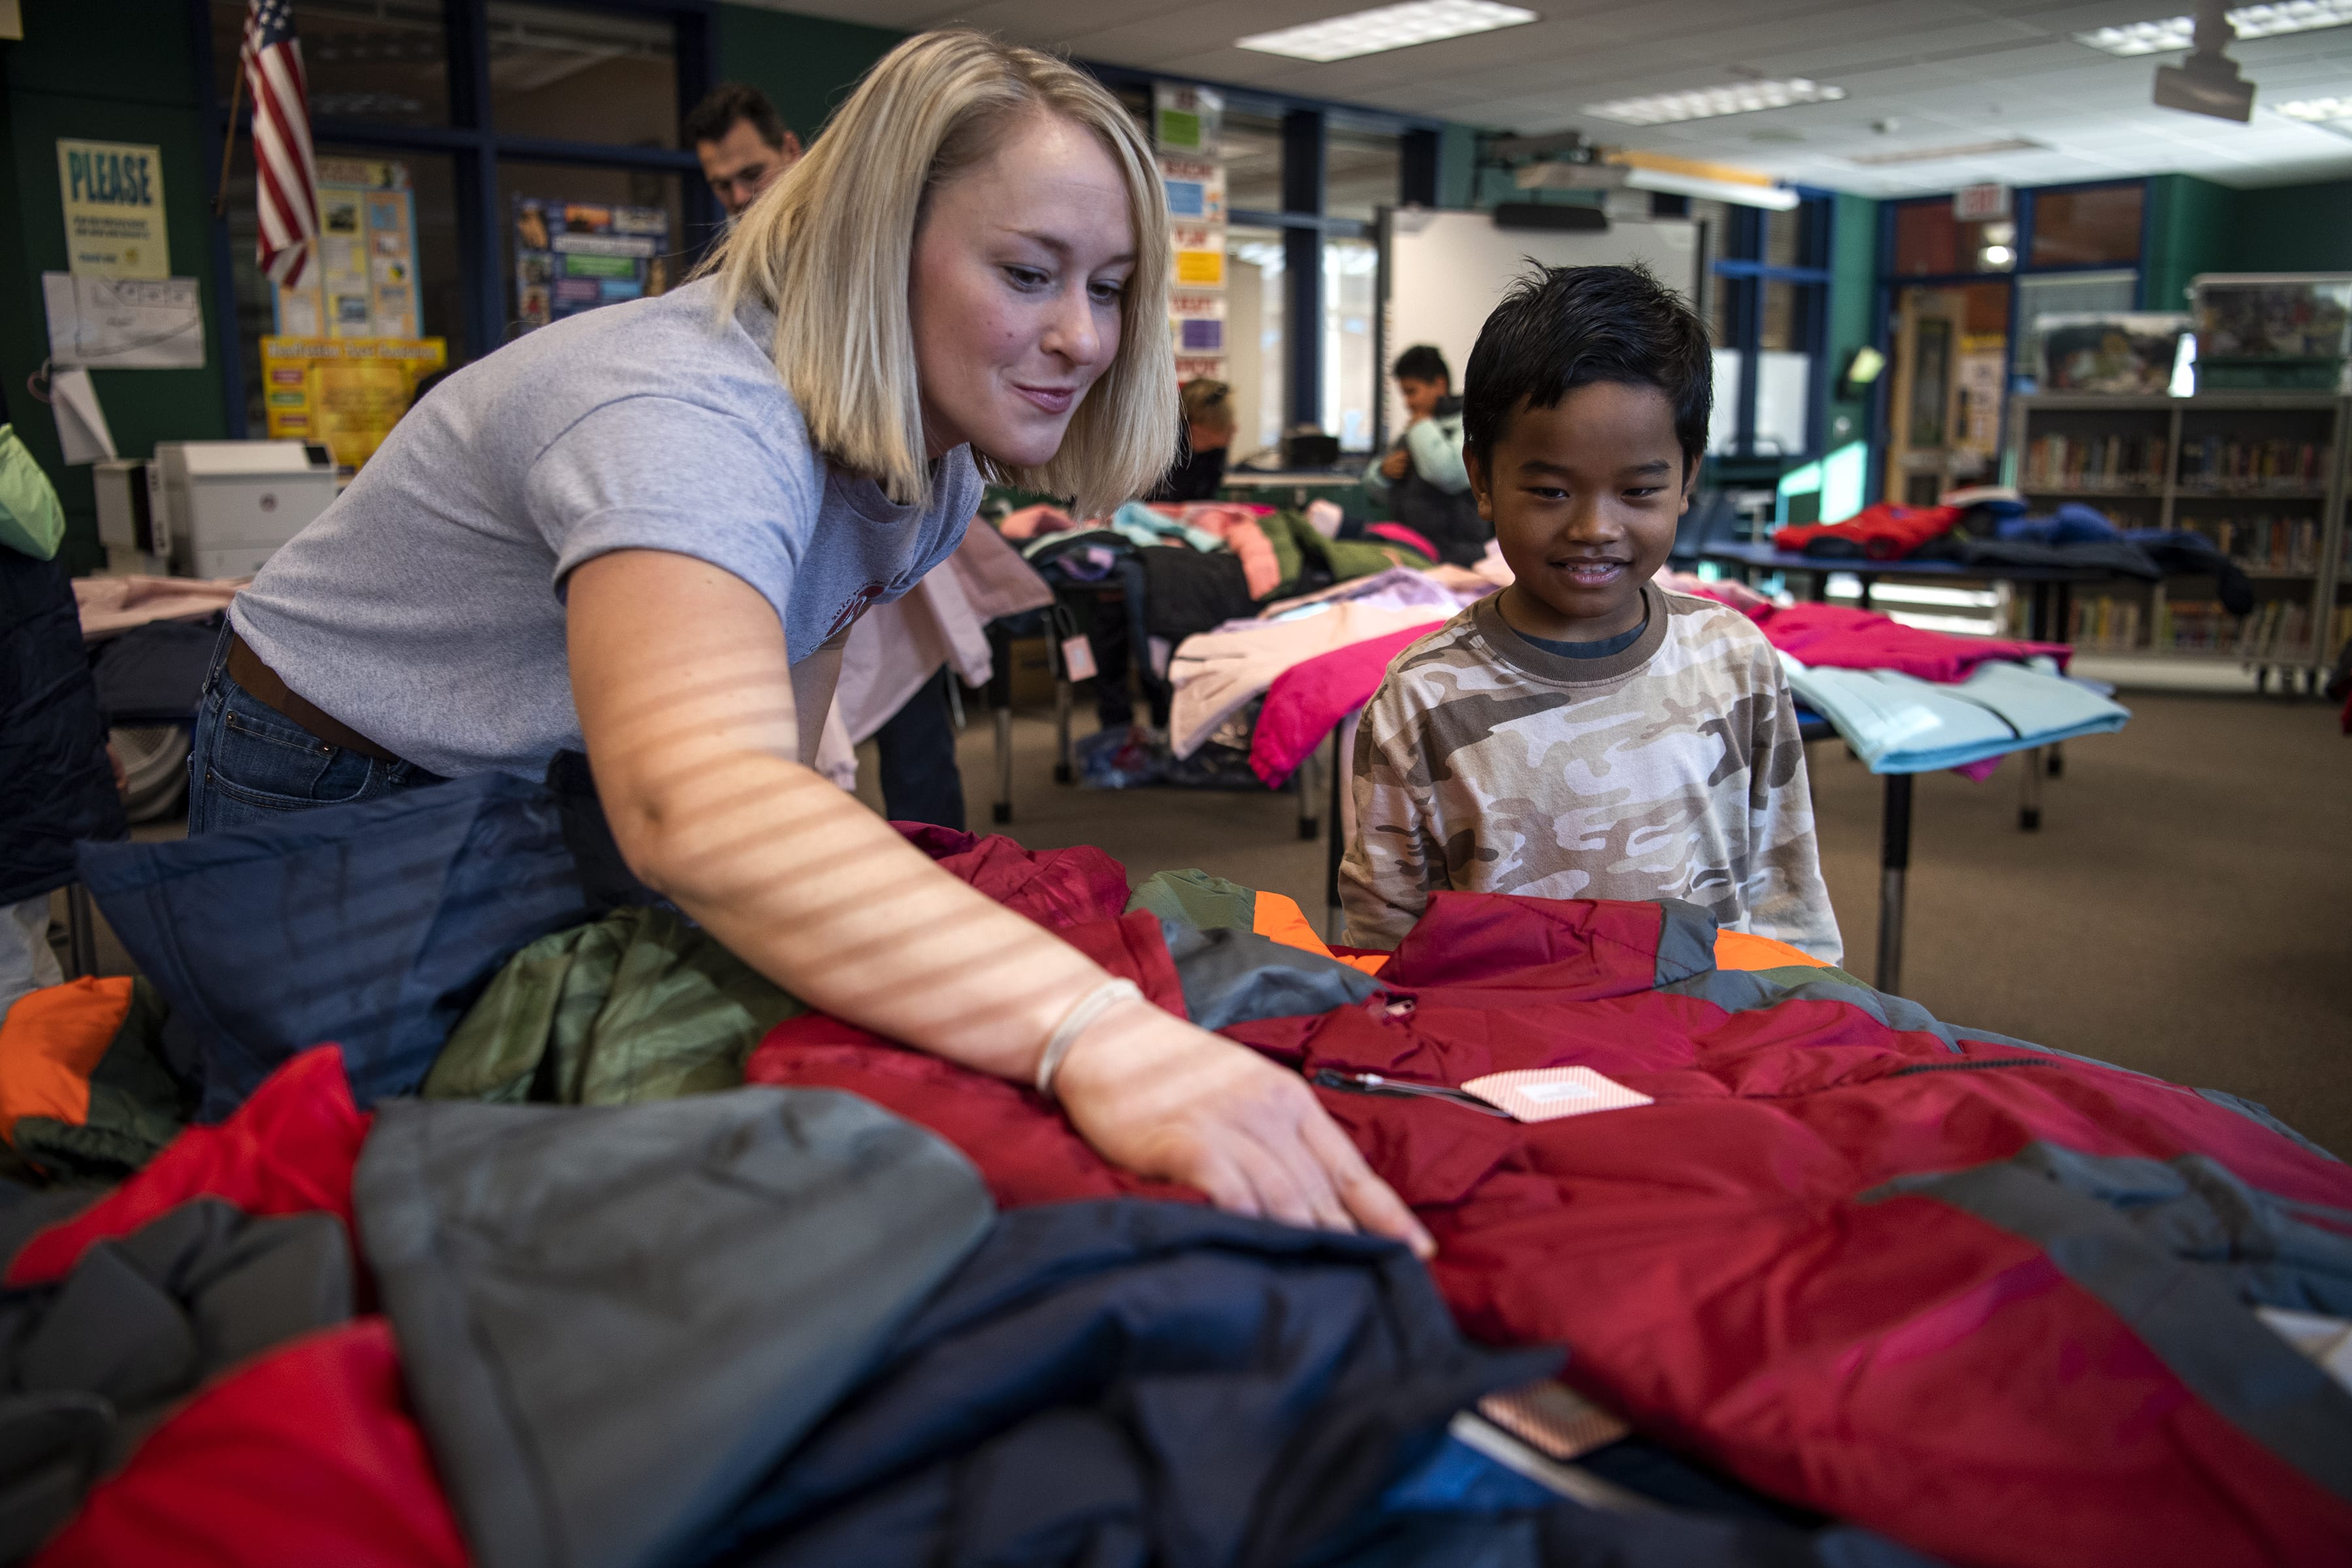 Vancouver Fire Department firefighter Kady Bieber, left, helps second-grader Erson Ermay pick out a new winter coat Thursday at Washington Elementary School in Vancouver. Firefighters with IAFF have partnered with Operation Warm to distribute more than 200,000 coats in more than 300 cities nationwide since 2012. Dutch Bros Coffee and Paul Davis Restoration partnered with Local 452 to help raise funds for this year's event.